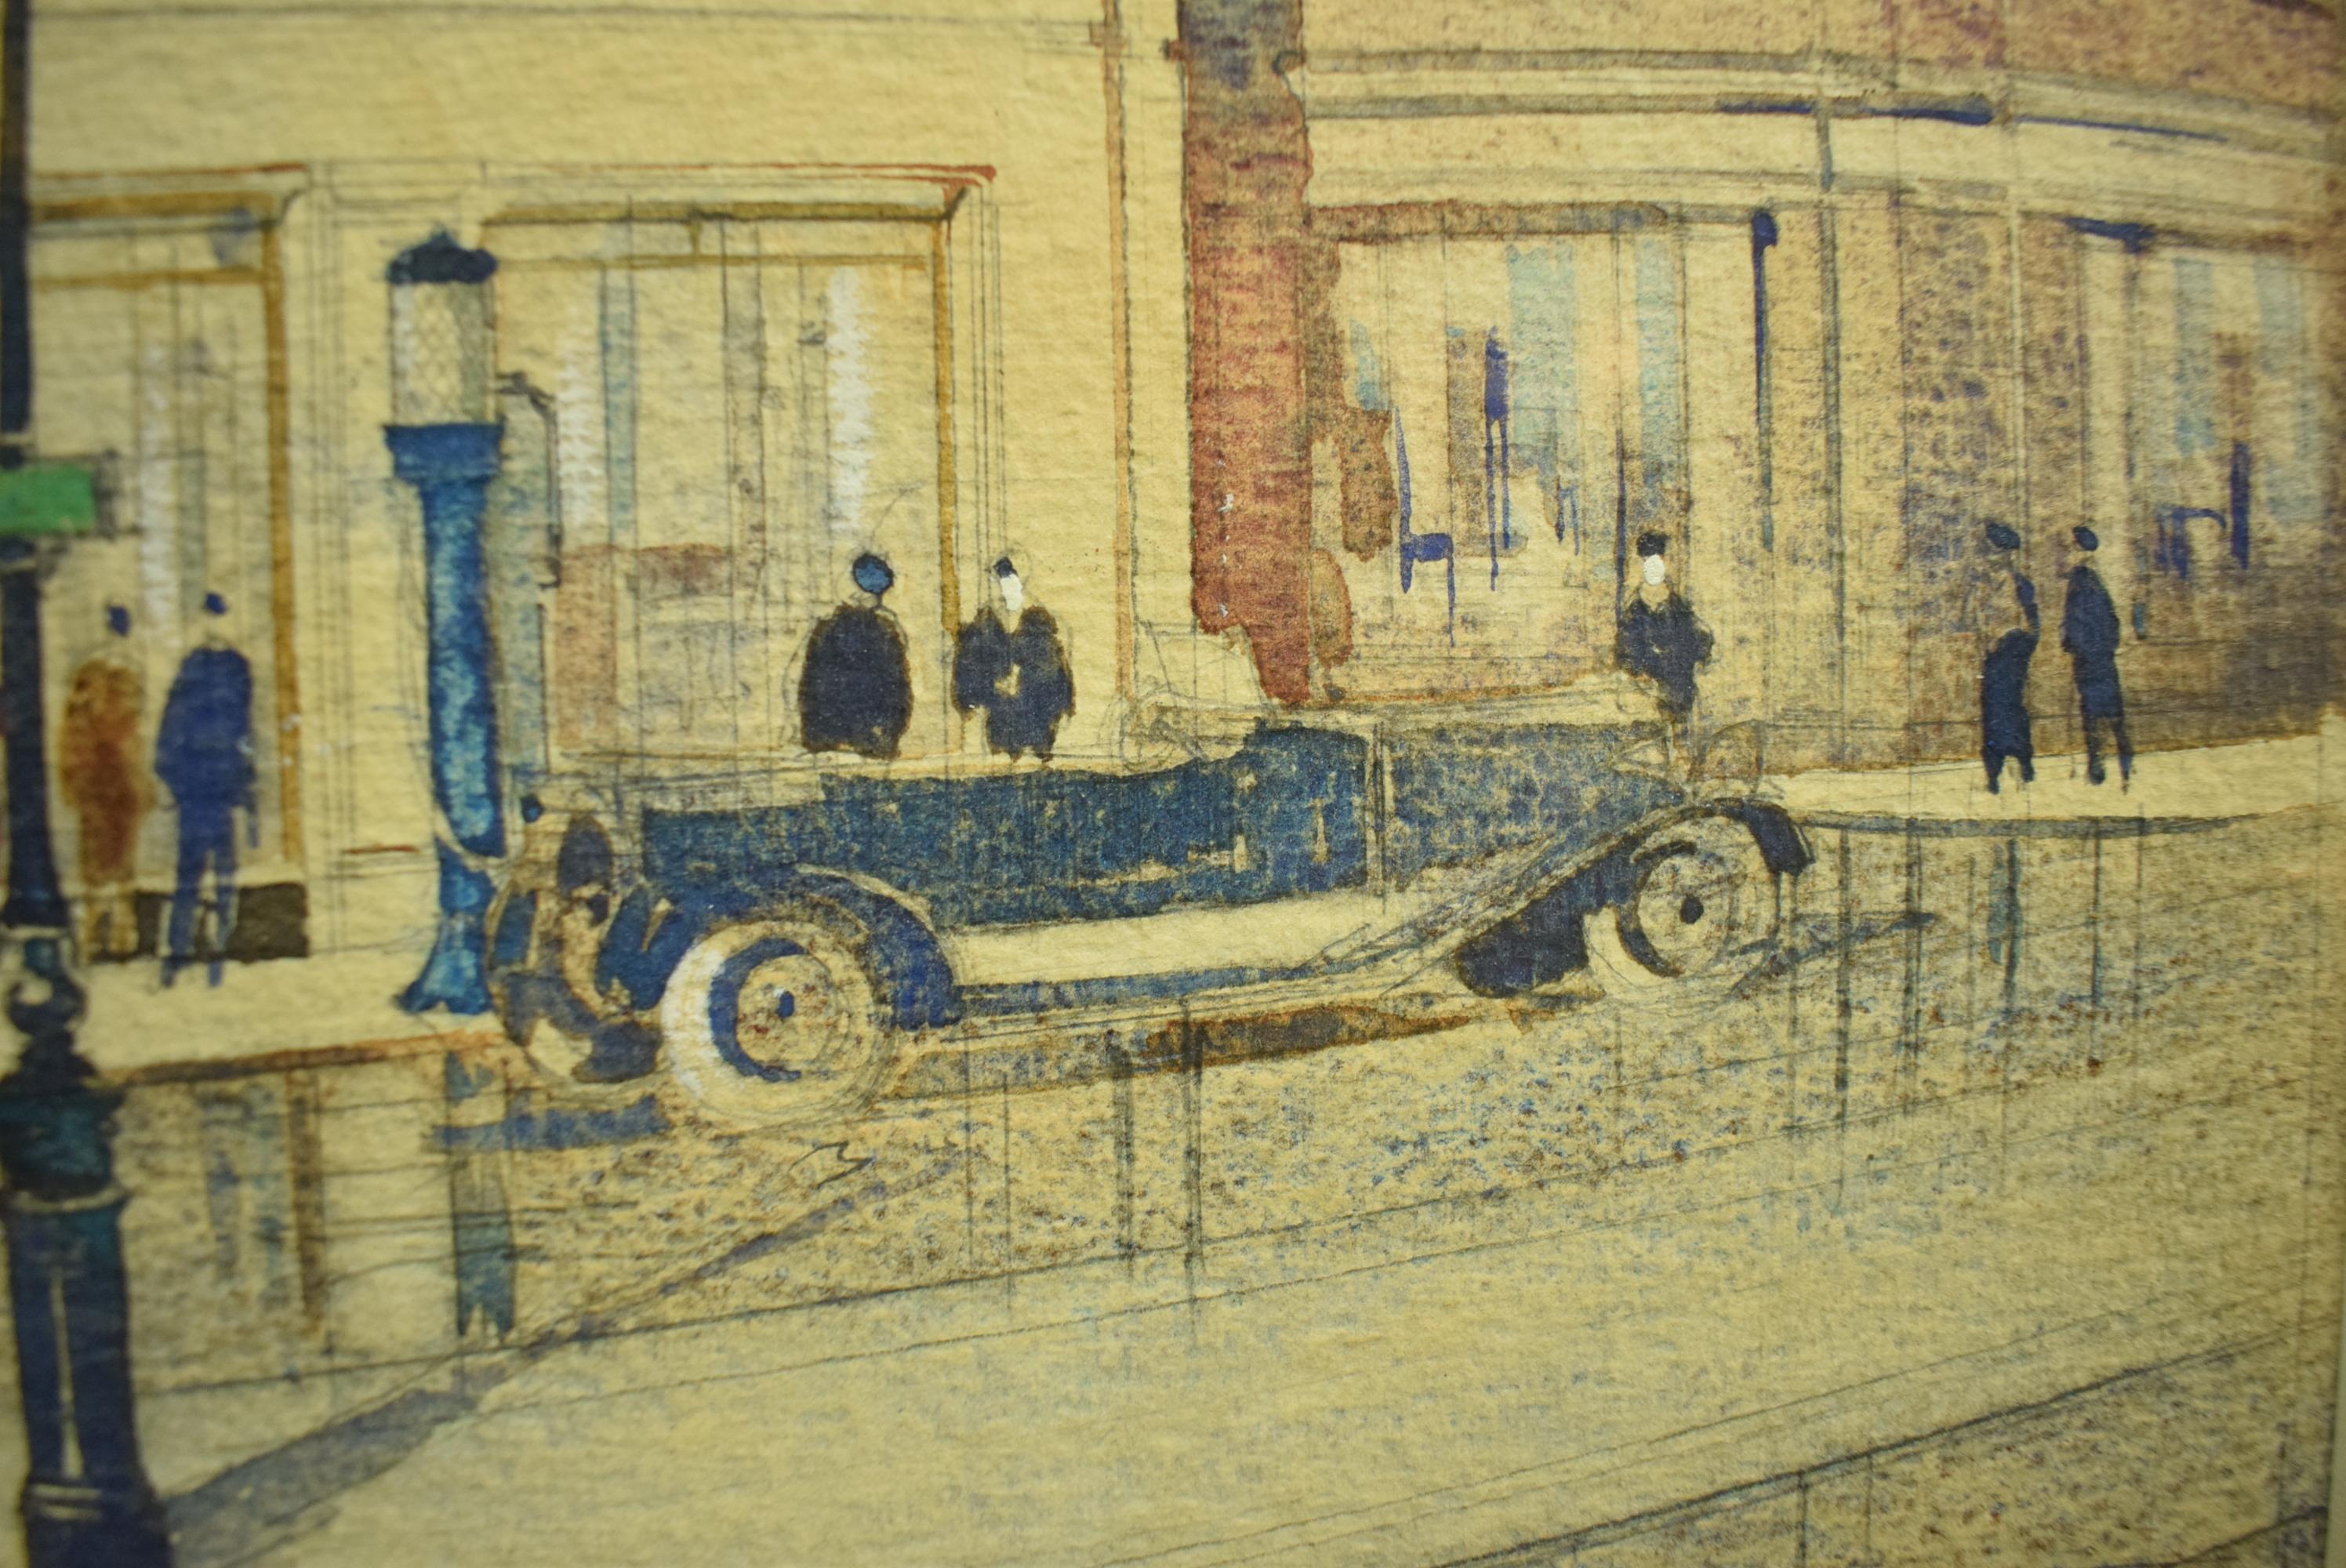 Classic c1930s artist's watercolour rendering drawn by P.D. Hepworth (signed (LL) for the motor showrooms at Purley designed by Nicholls & Hughes

Art Sz: 14